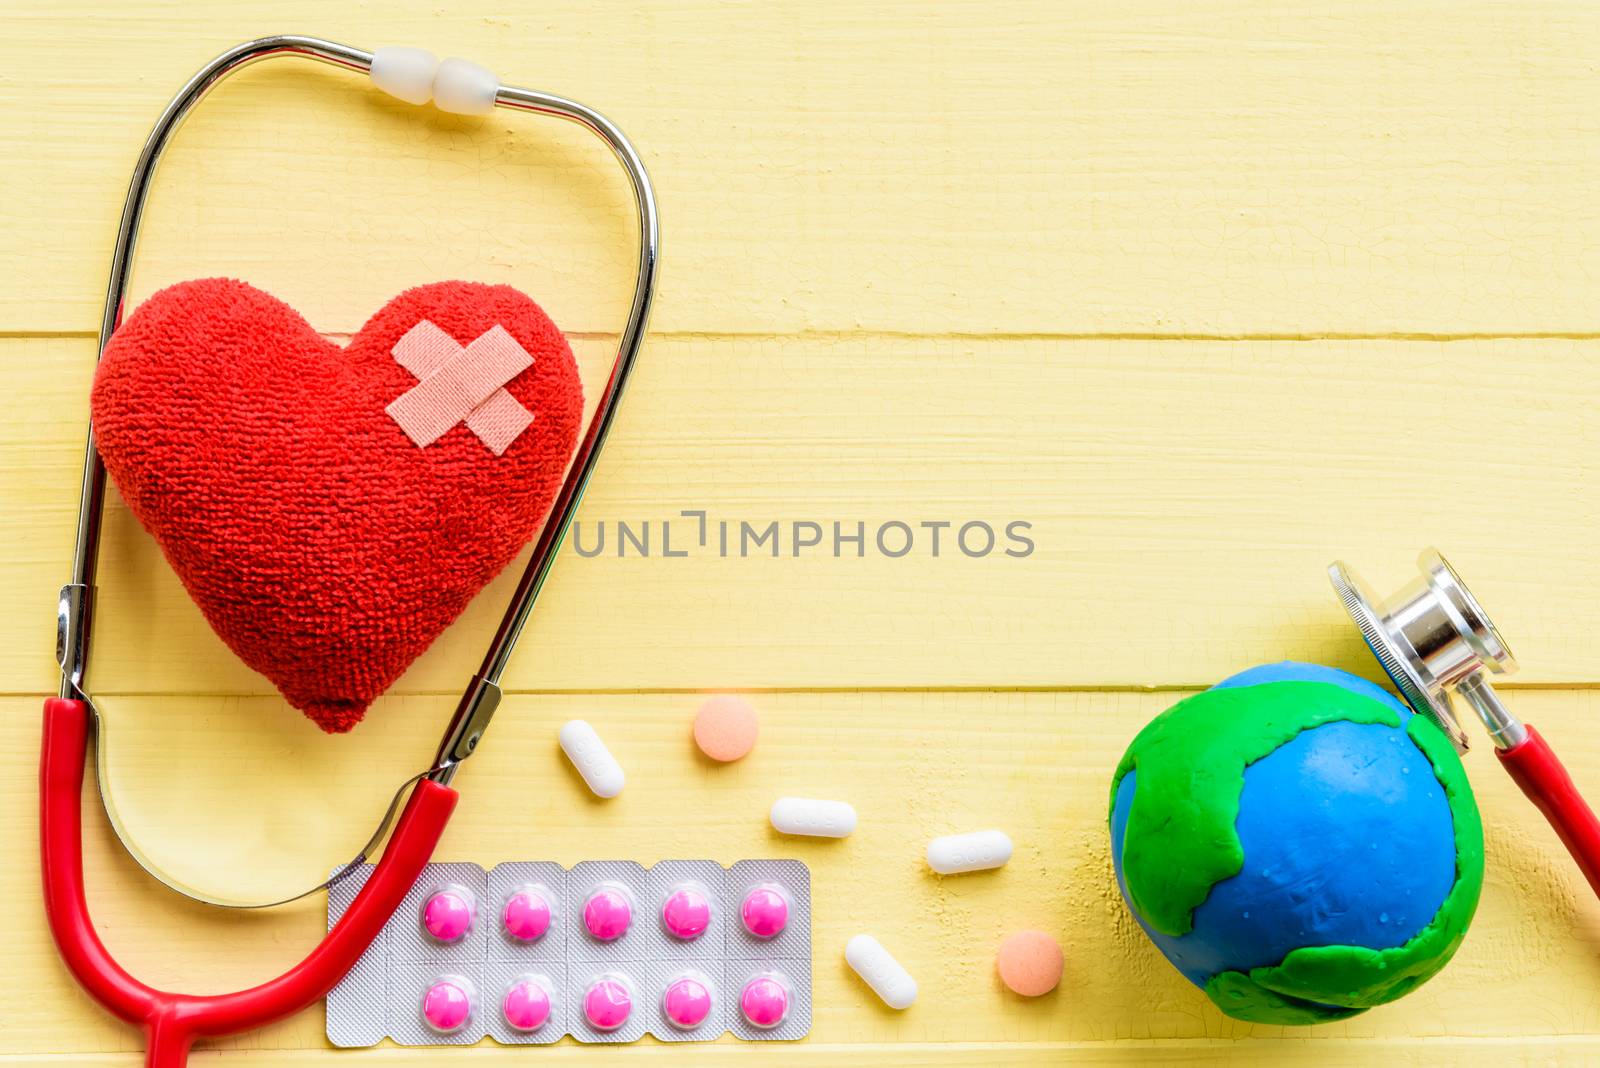 World health day, Healthcare and medical concept. Red heart with Stethoscope, handmade globe, thermometer and yellow Pill on Pastel white and pink wooden background.